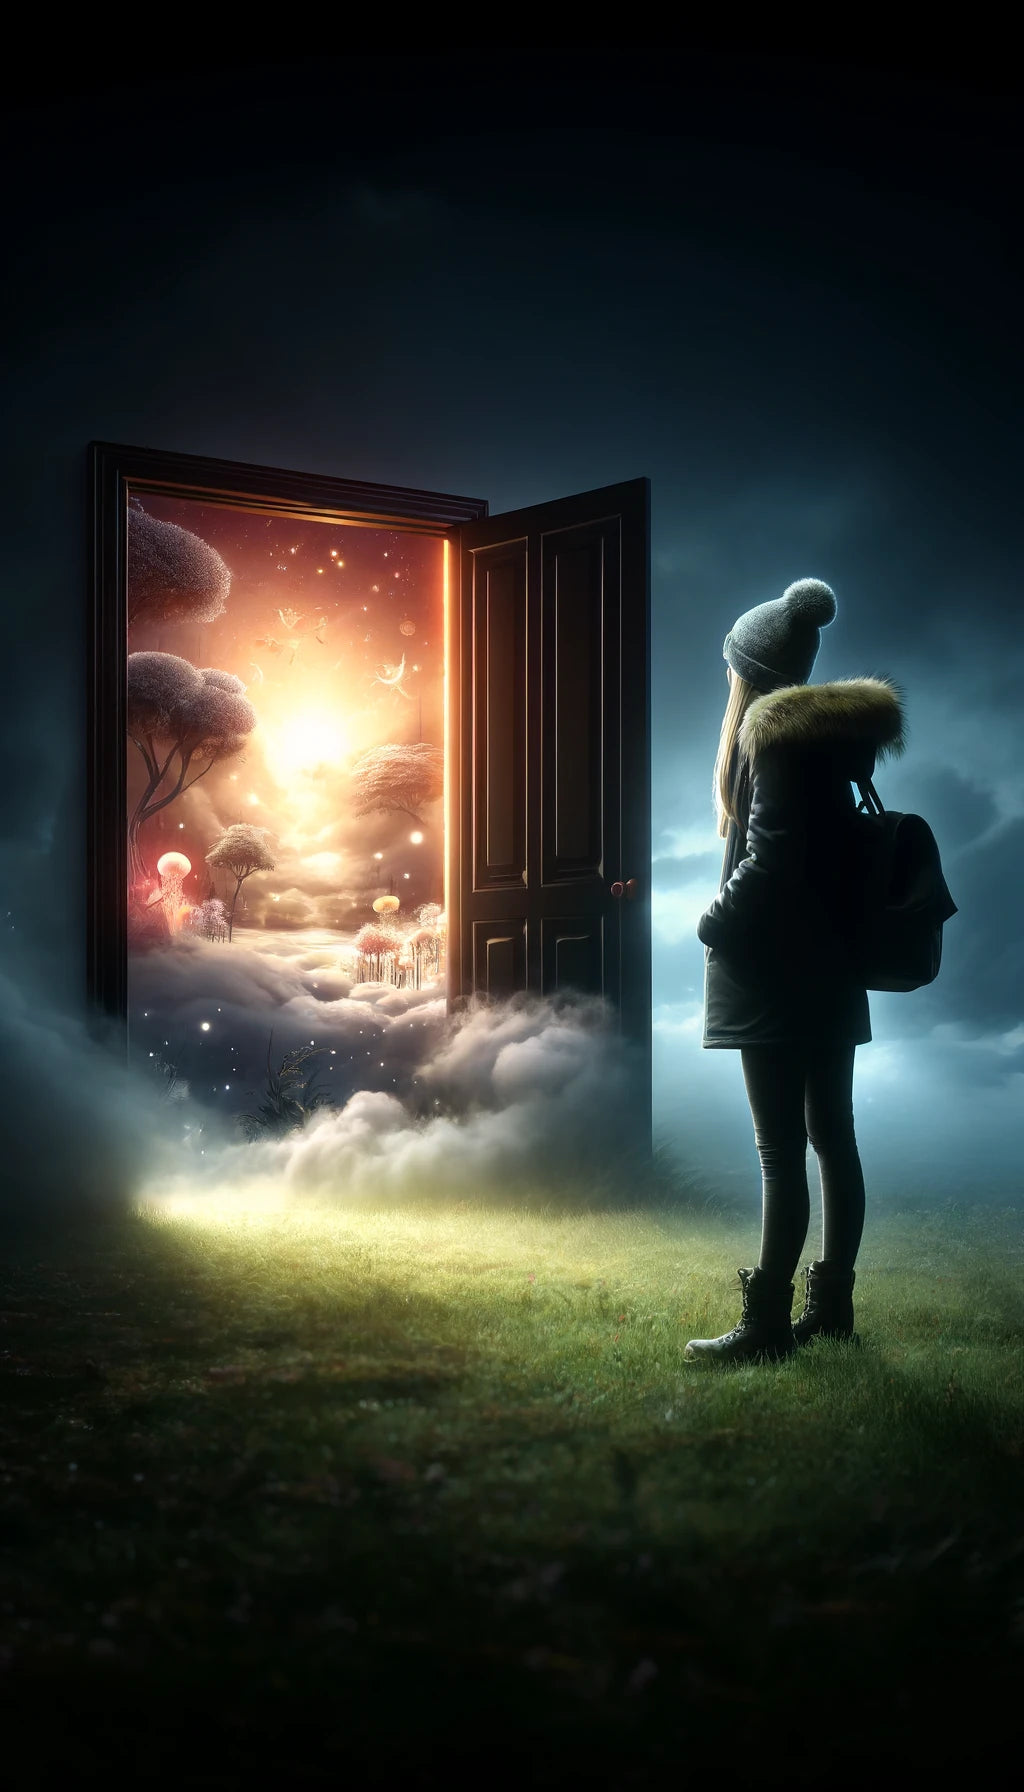 A young woman gazing into a dreamy, surreal world through the open door.